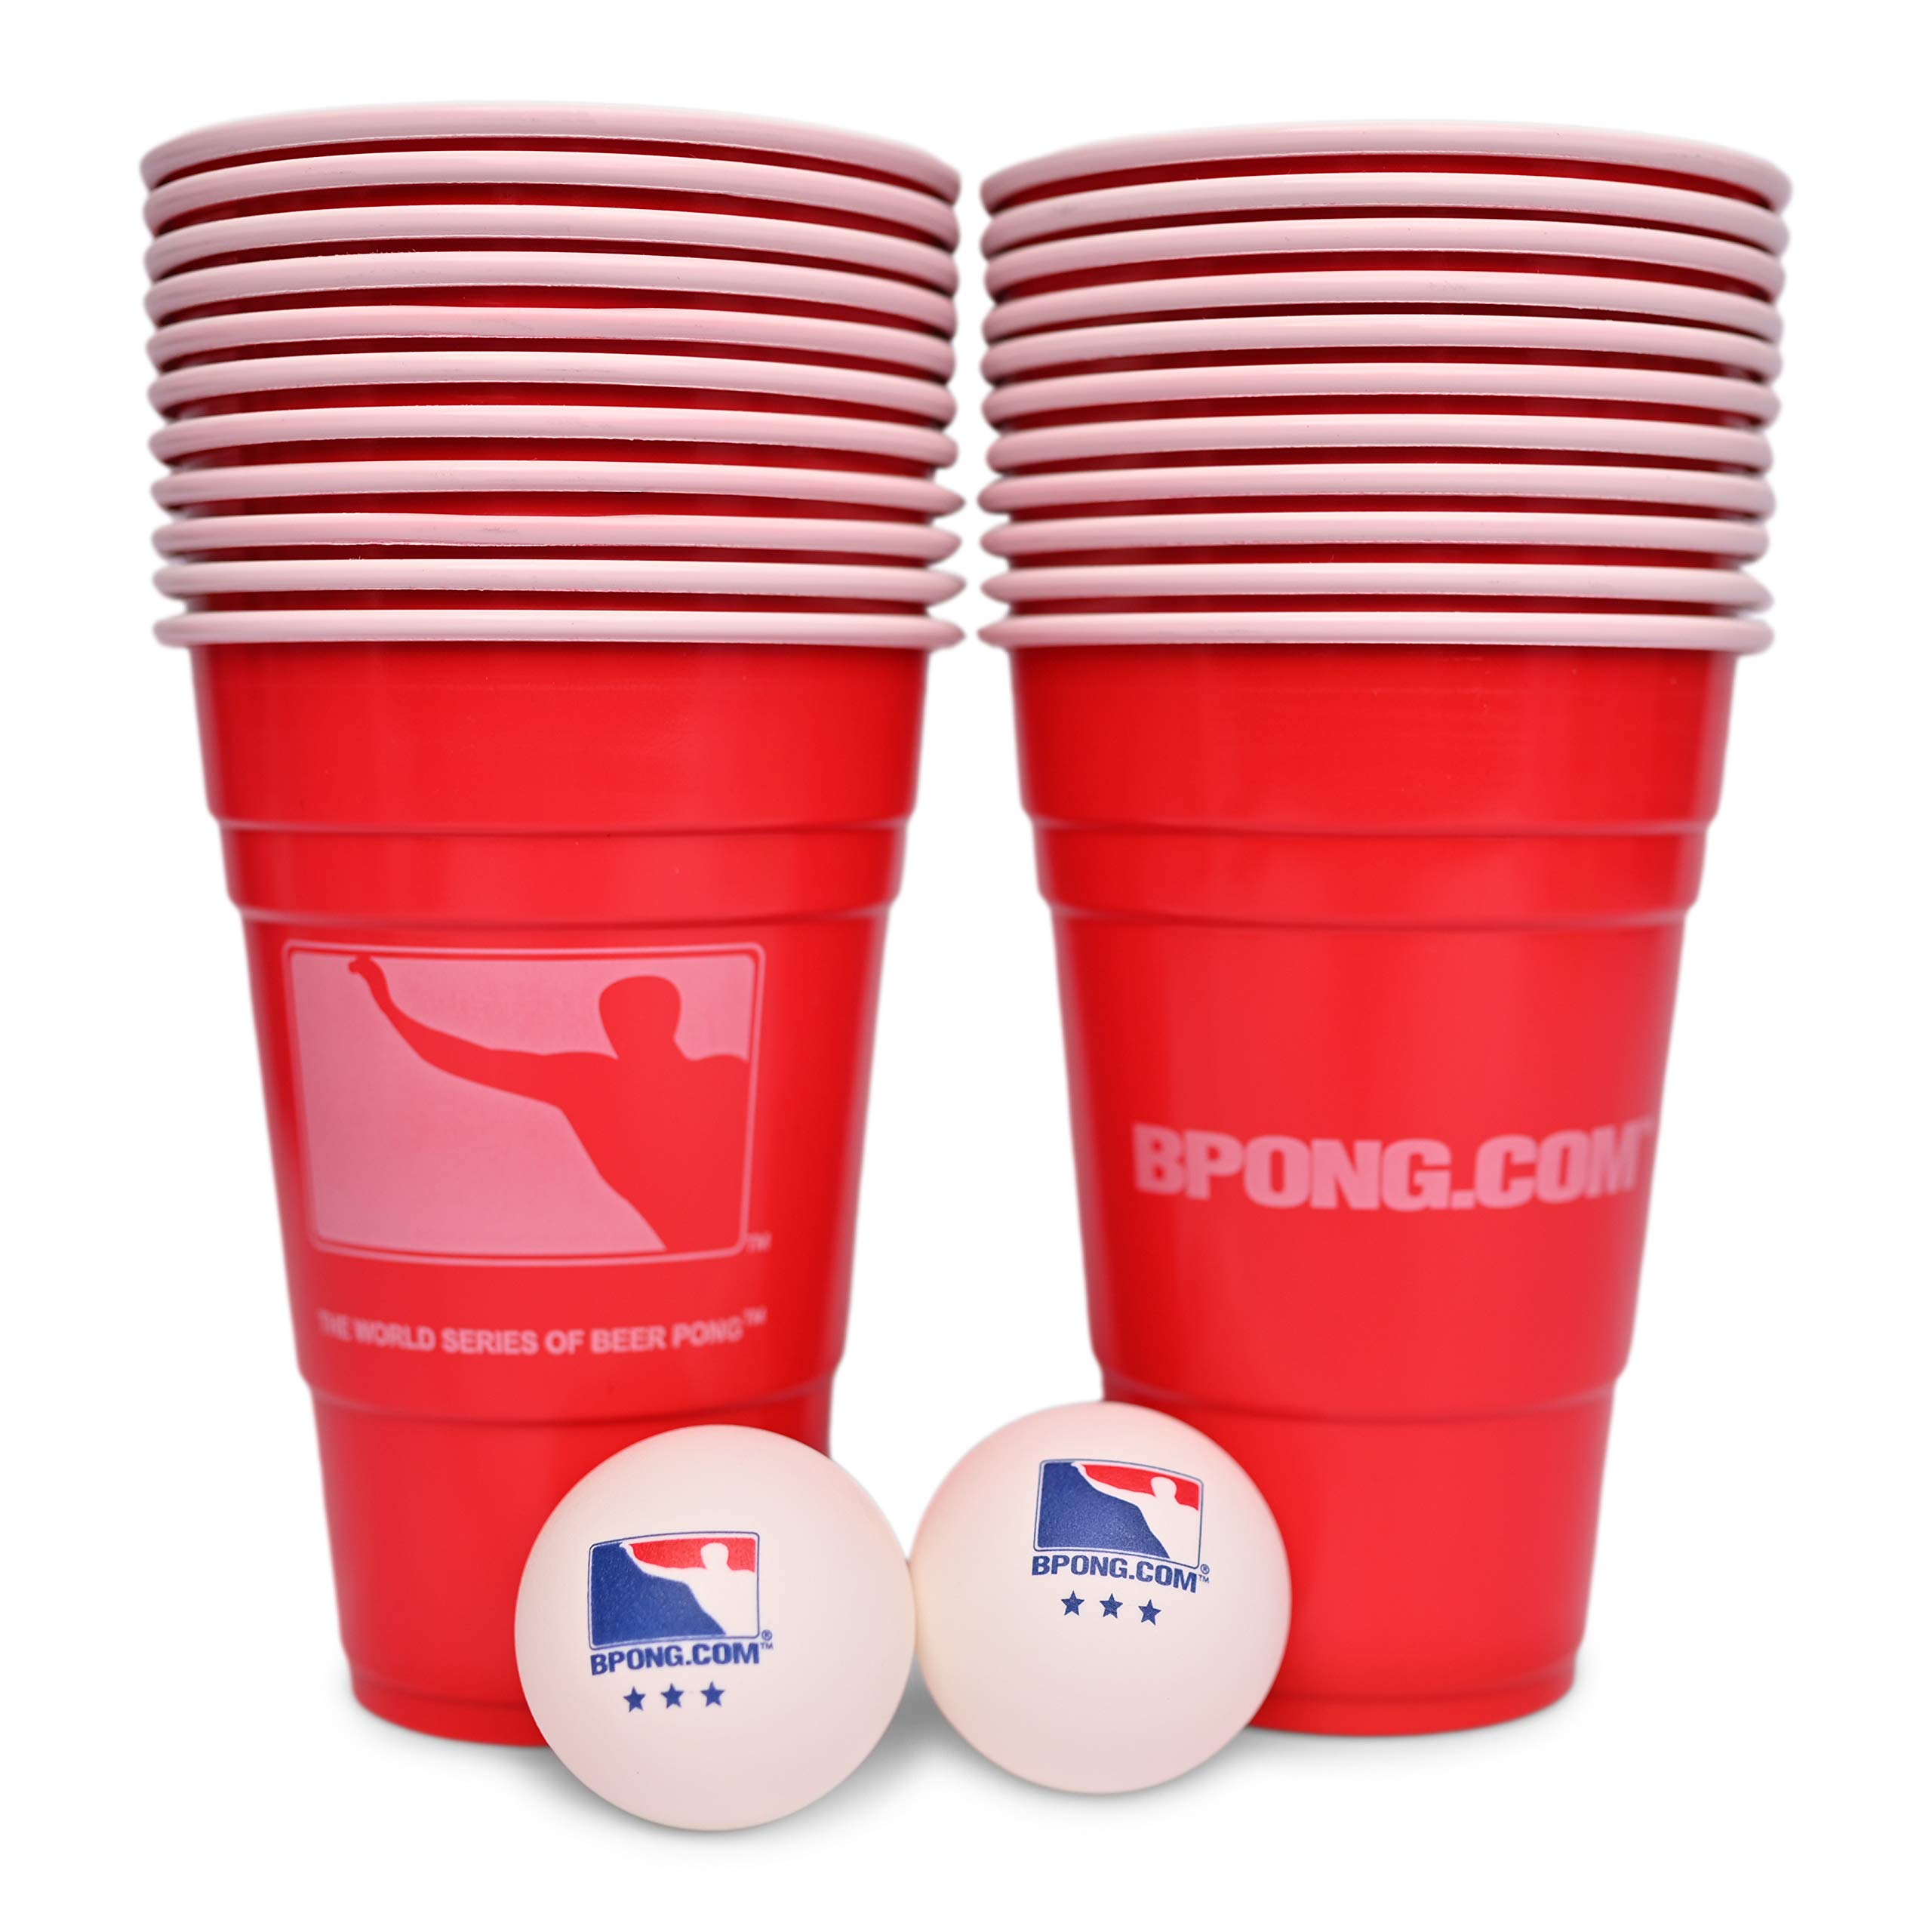 Beer Pong Cups by BPONG and The WSOBP - CUPA01-50PK | BPONG